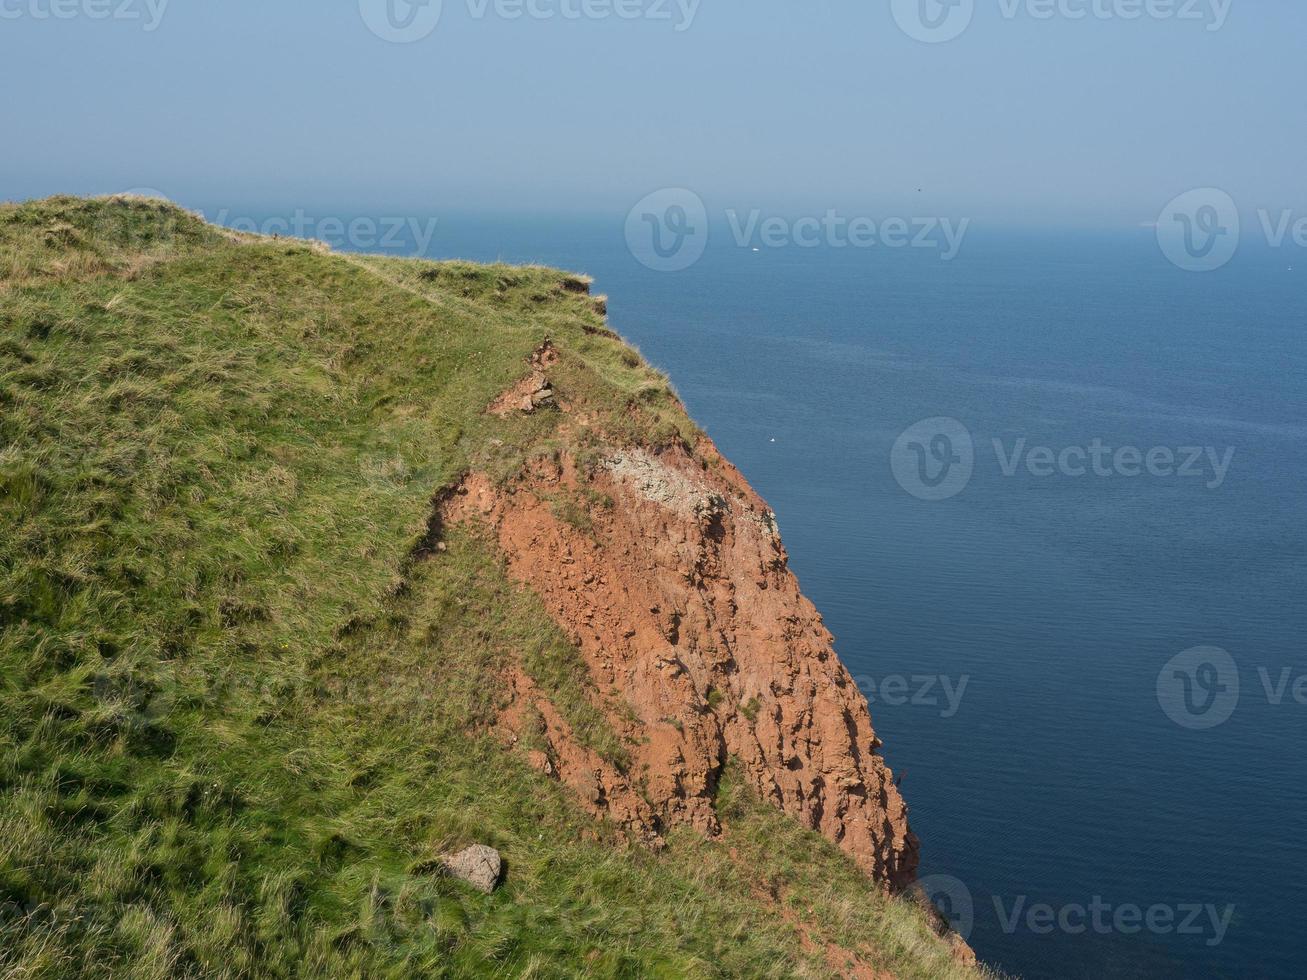 helgoland island in the north sea photo